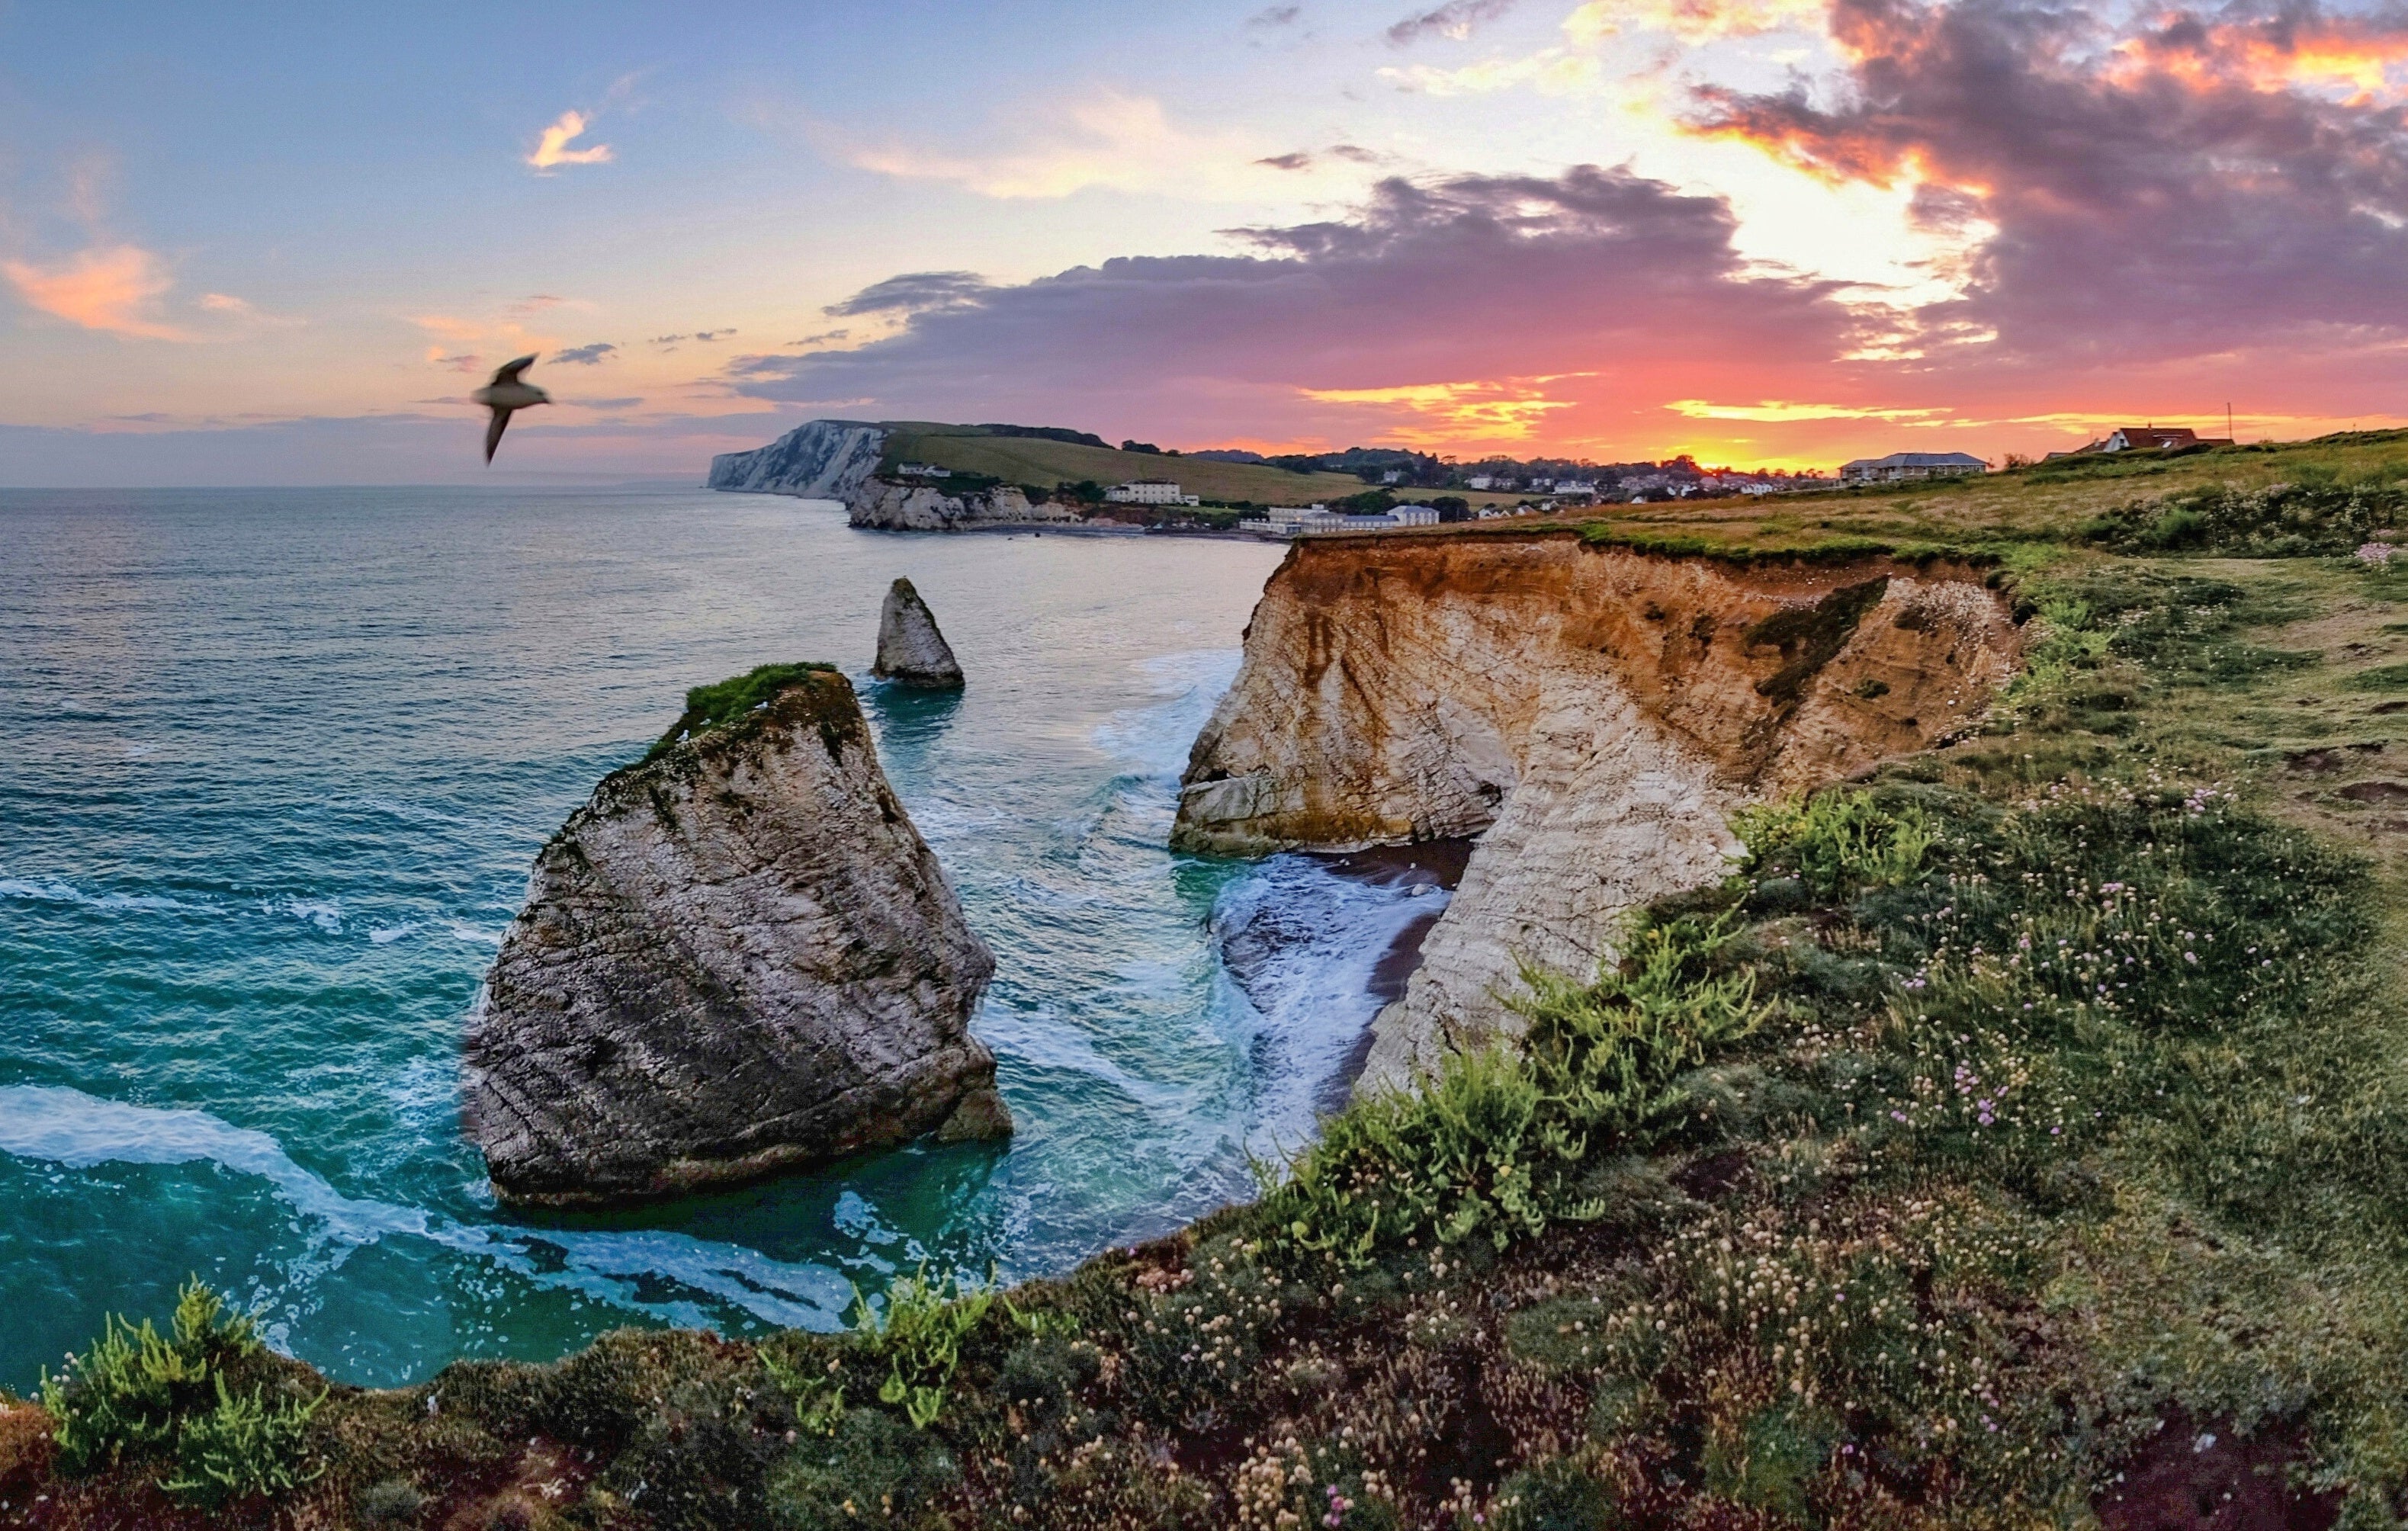 A visit to Freshwater Bay makes for a spectacular sunset